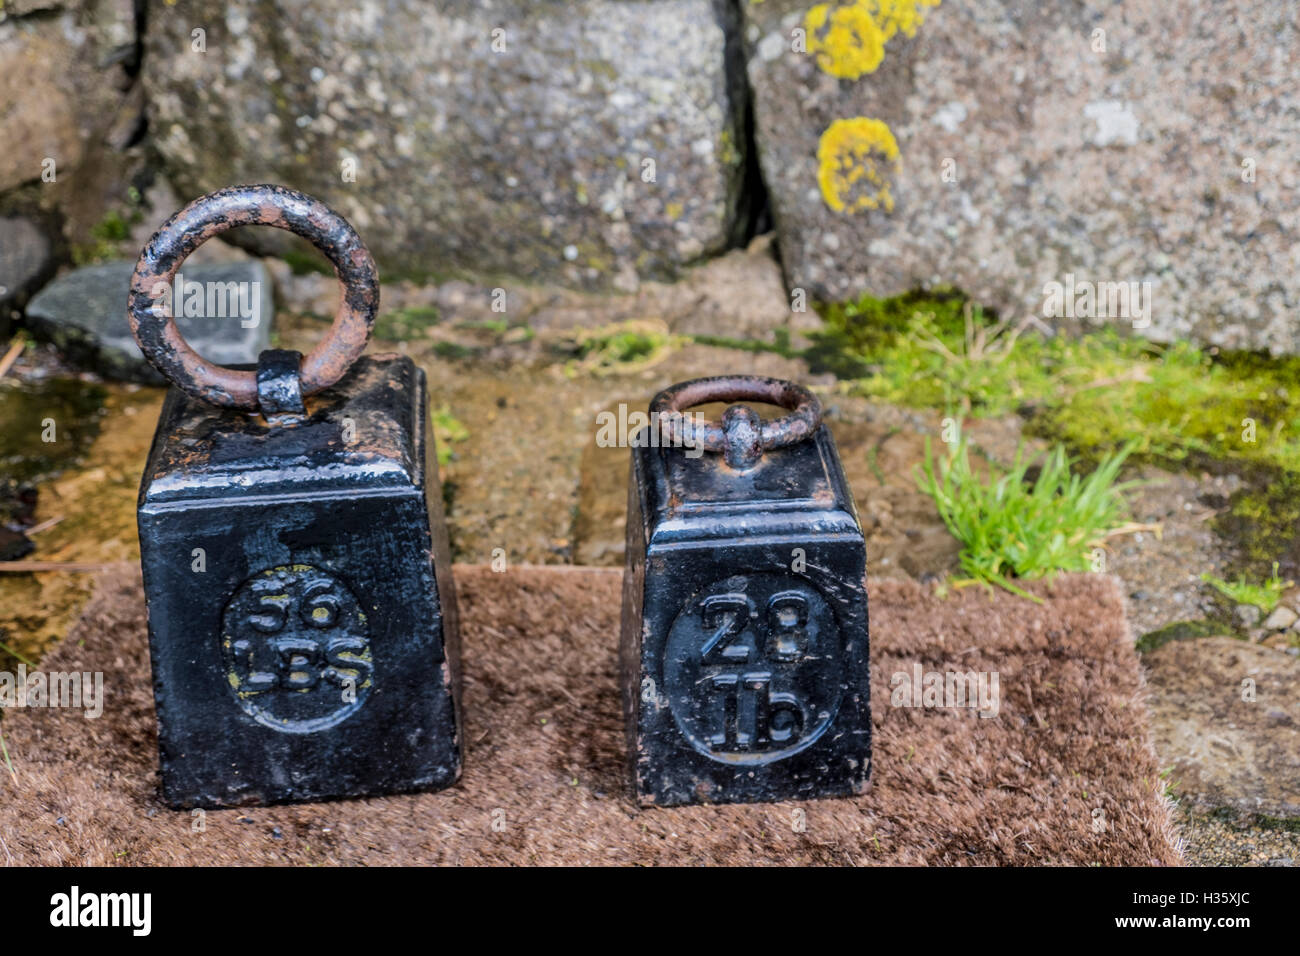 Pair of heavy black painted vintage weights inscribed with imperial measurements 56 LBS and 28lb against lichen covered stone Stock Photo